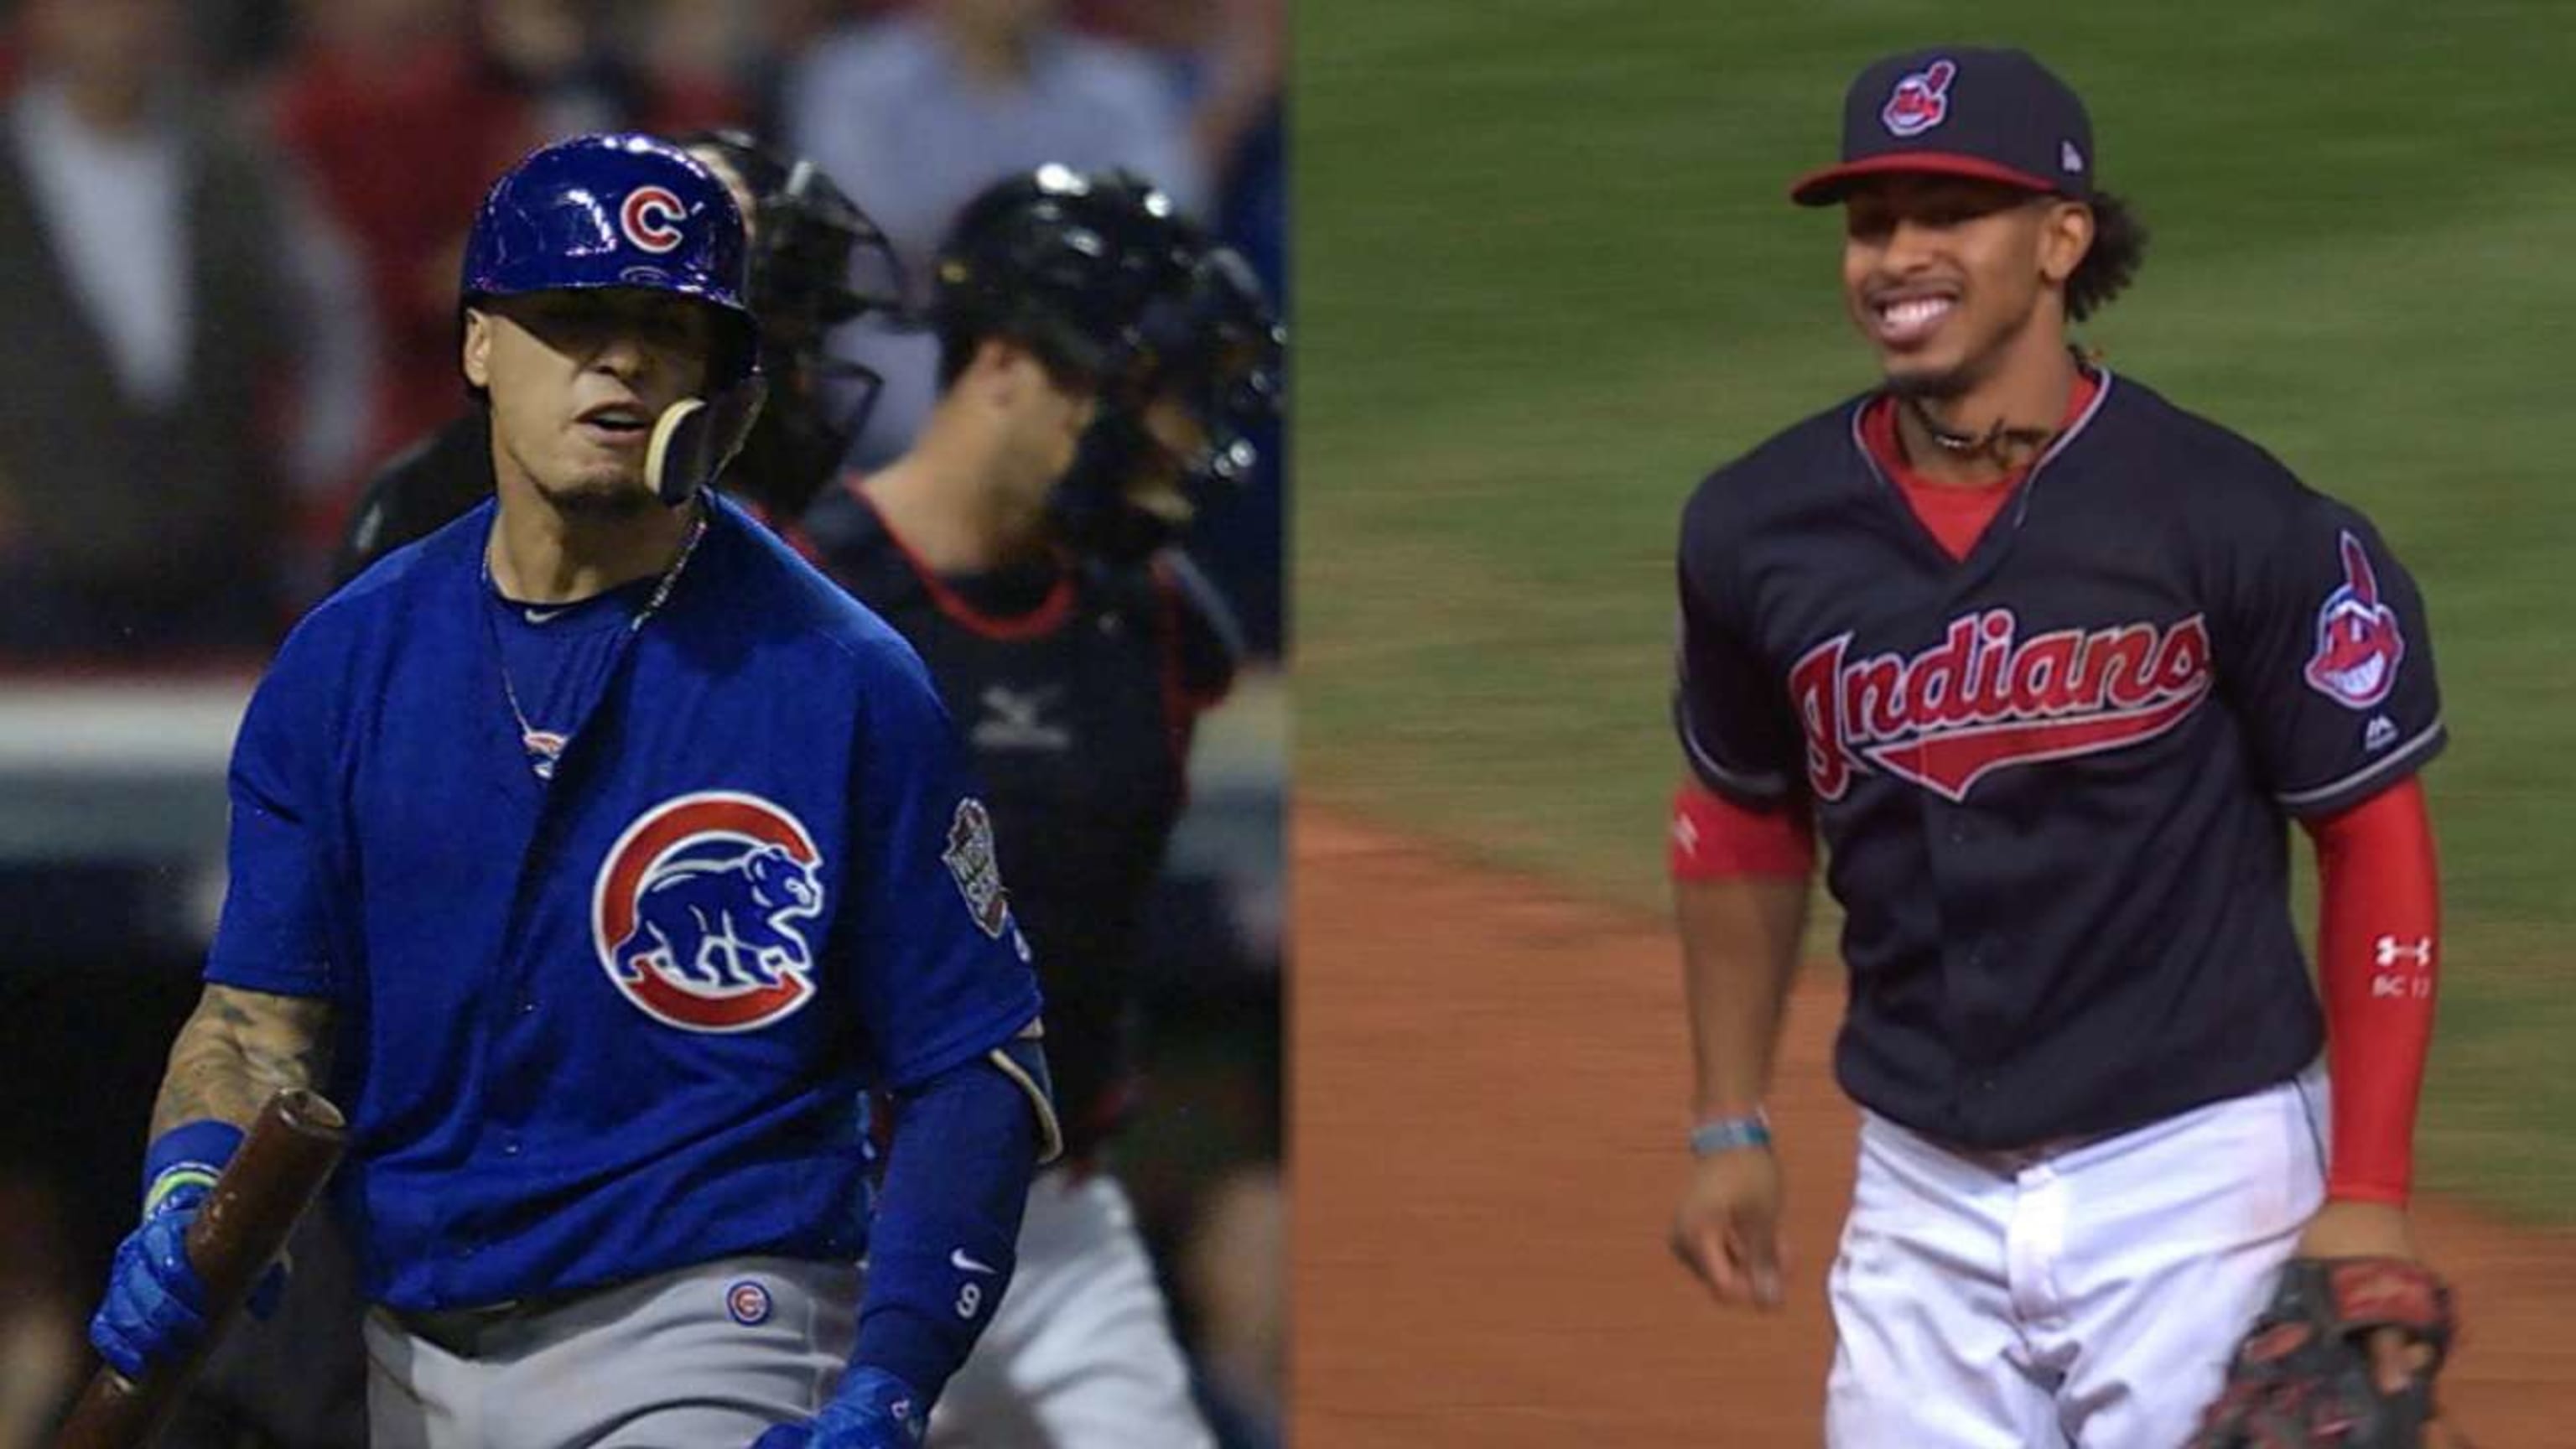 Great Cubs-Indians World Series Game 7, great for Arizona spring training